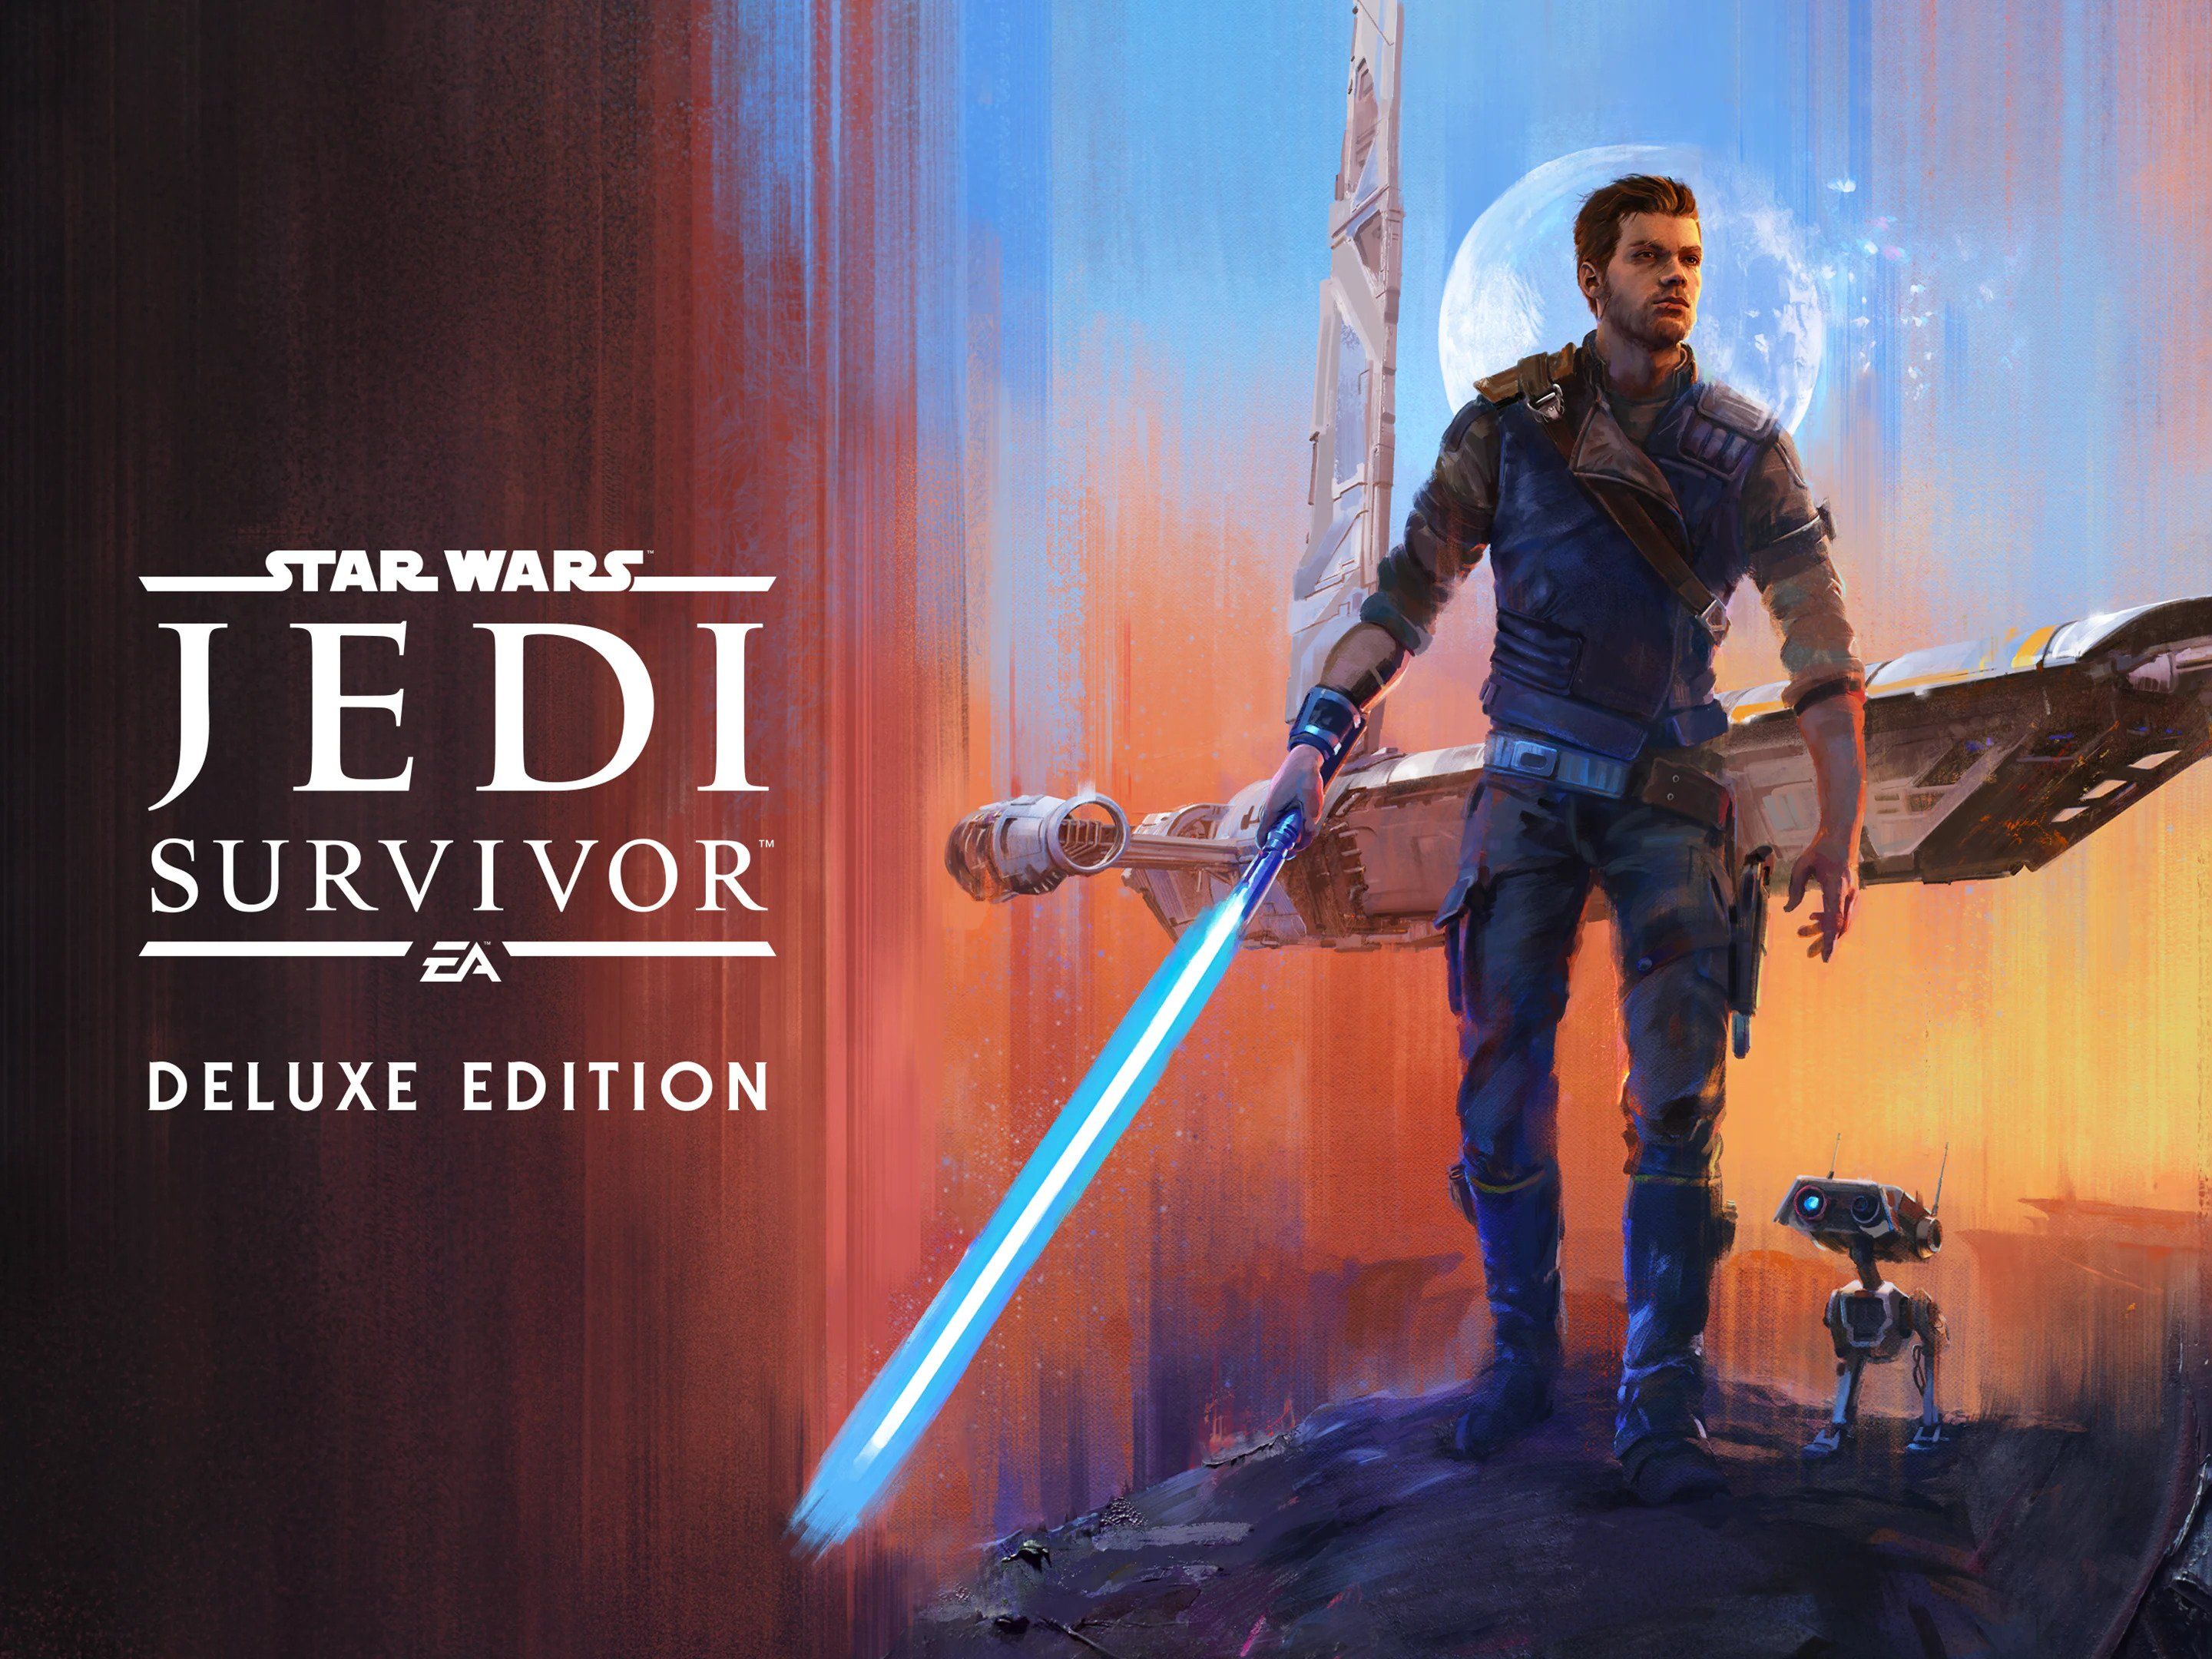 Star Wars Jedi: Survivor PS5 Update Available Now, Here Are the Patch Notes